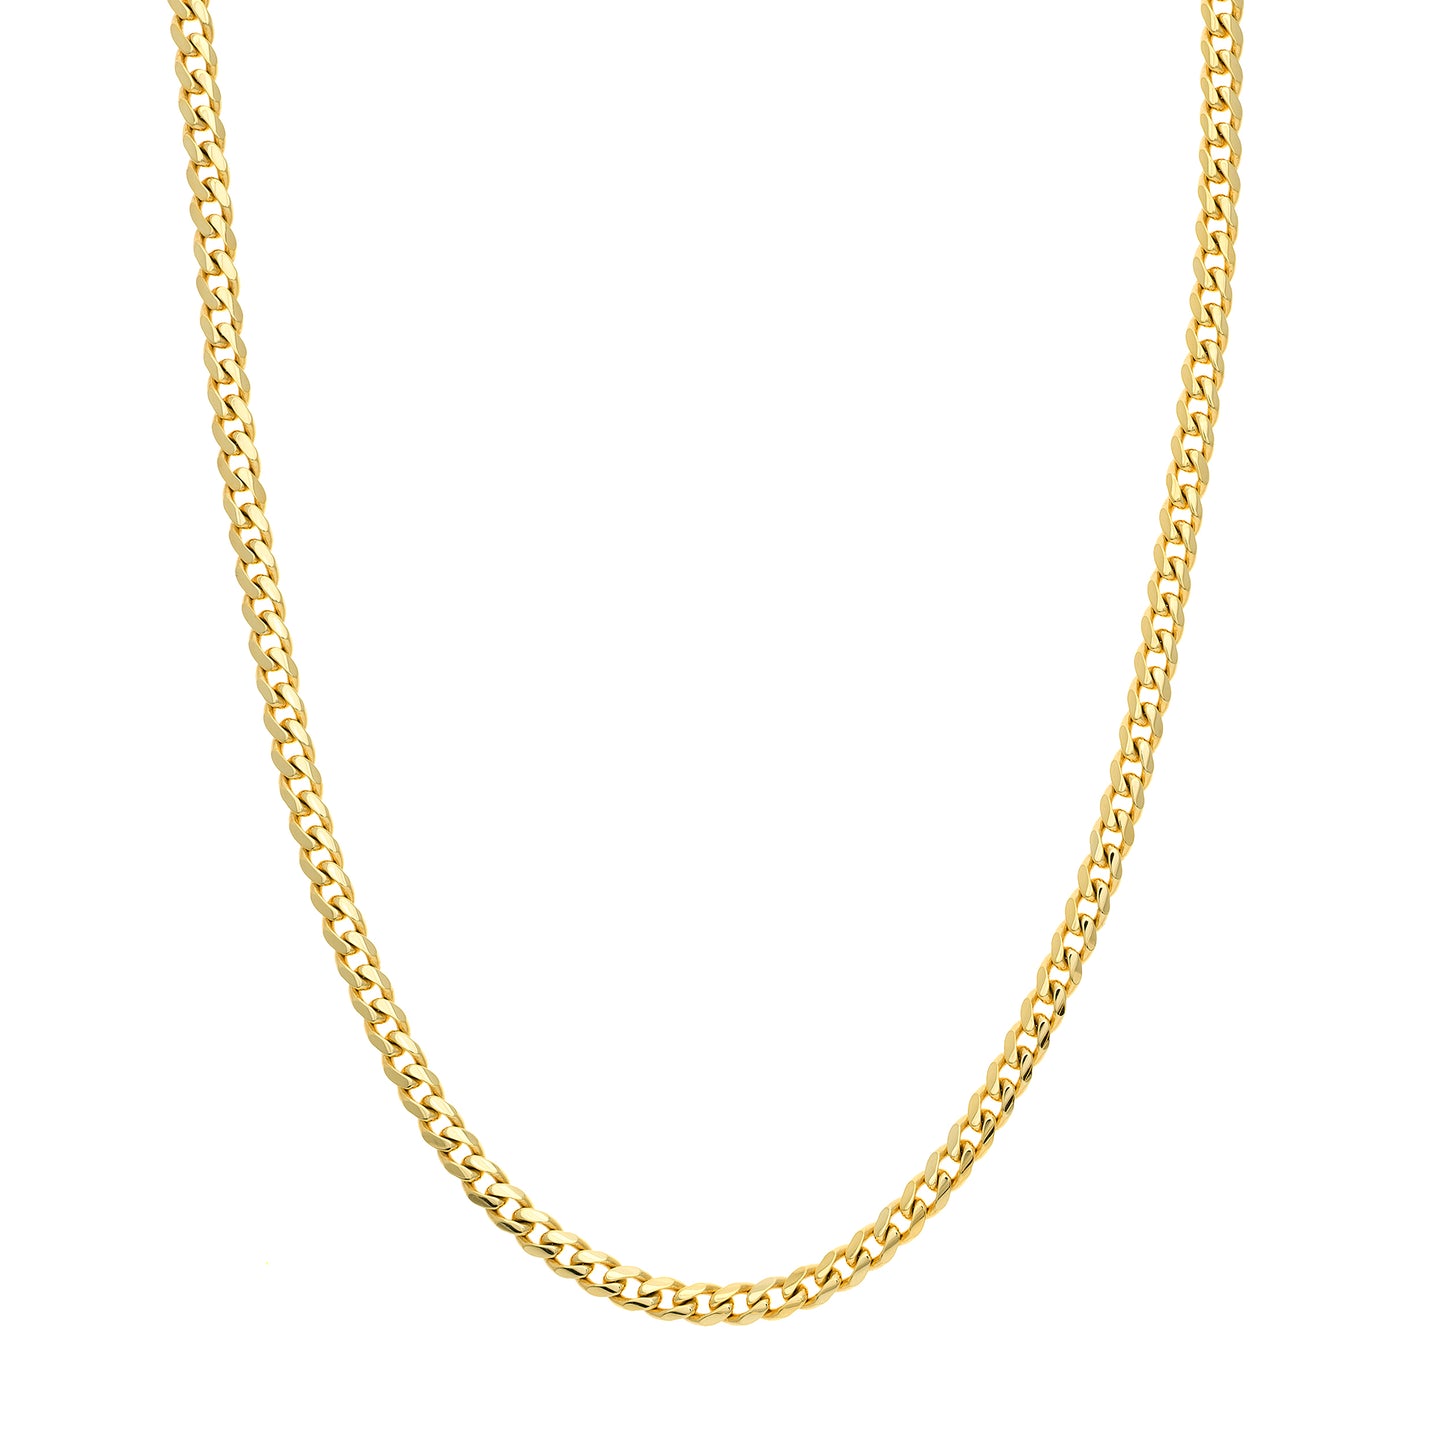 14k Gold Cuban Link Chain, Miami Cuban Necklace,  22 inch, 24 inch, 26 inch, 5MM